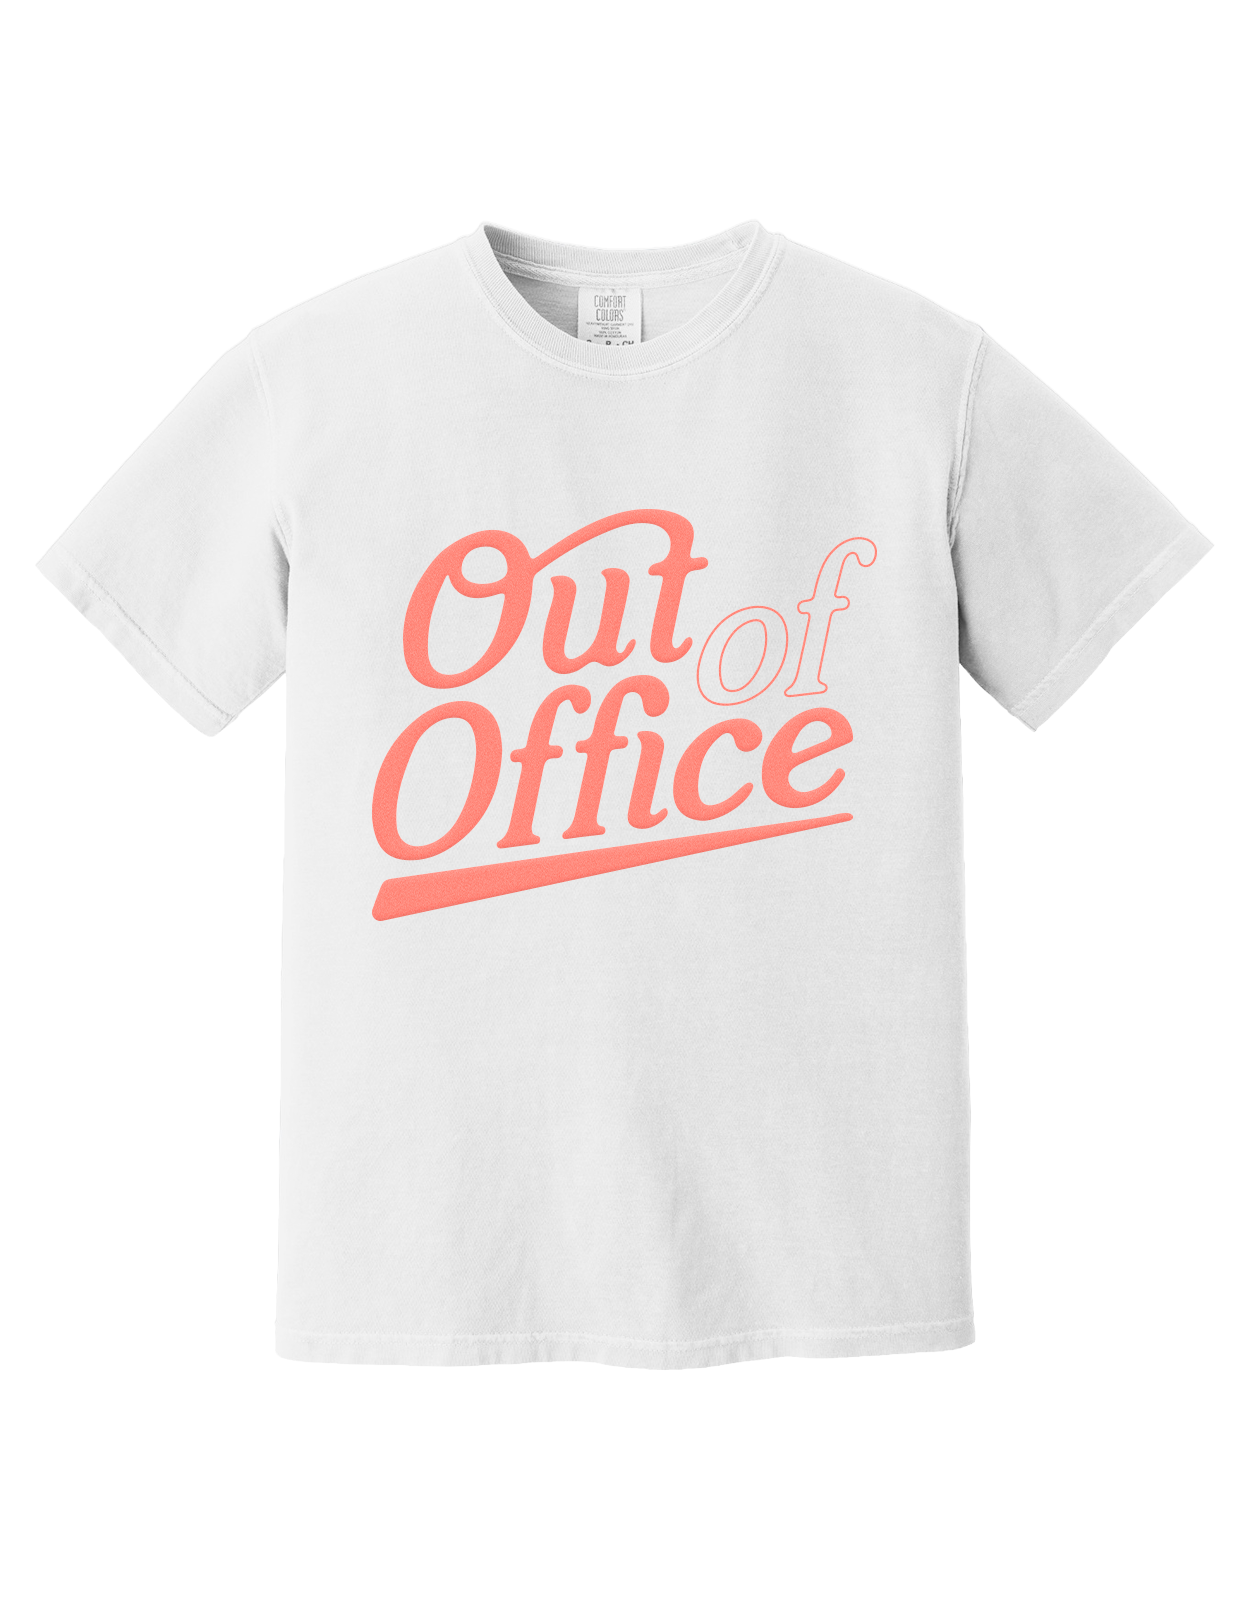 Out-of-office-puff.png